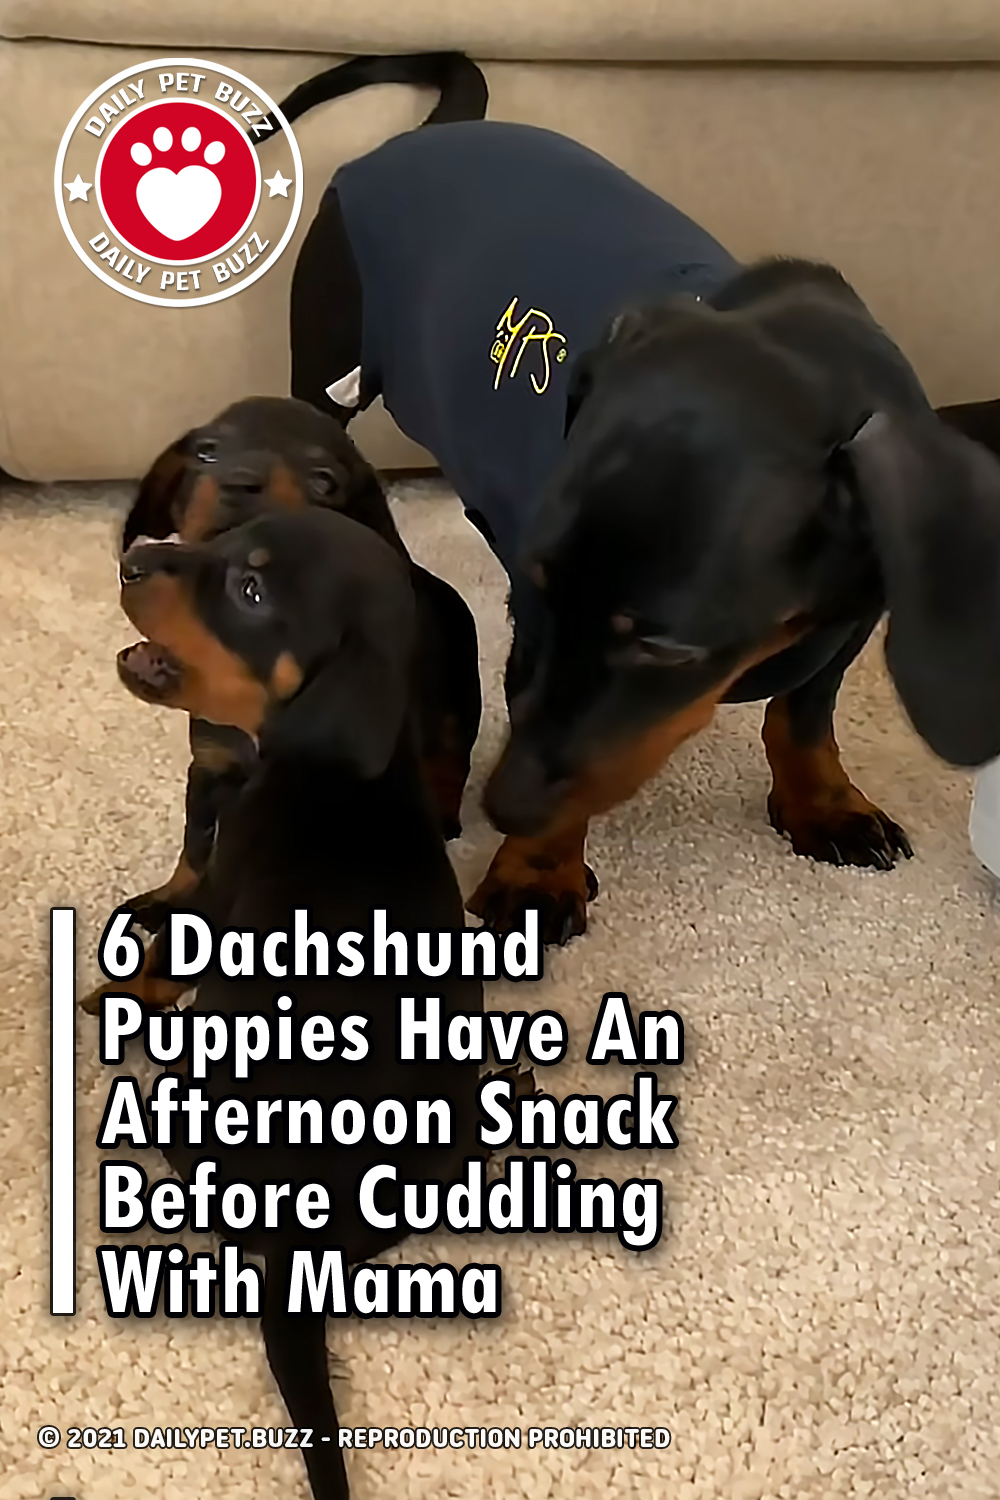 6 Dachshund Puppies Have An Afternoon Snack Before Cuddling With Mama